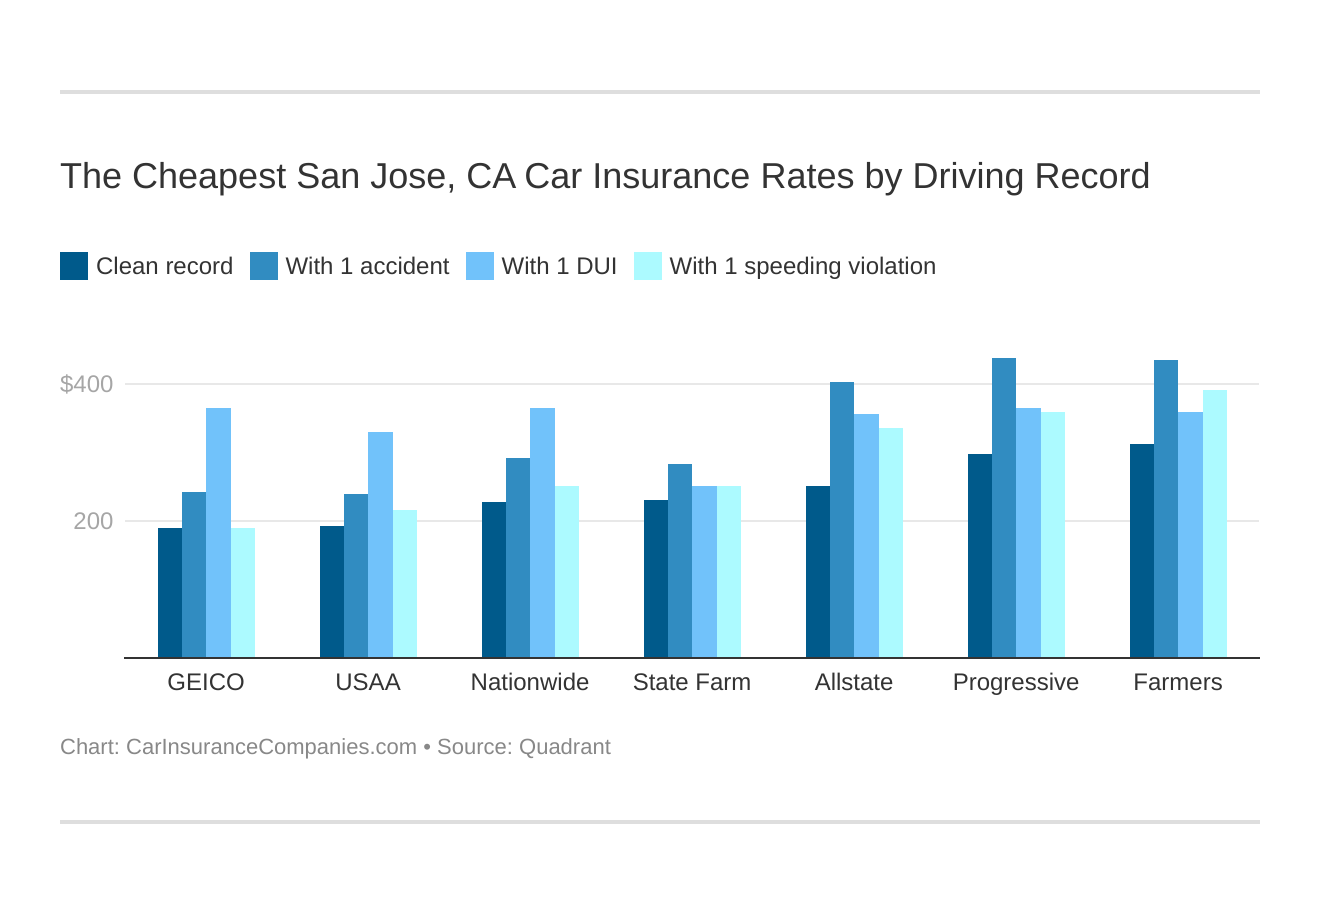 The Cheapest San Jose, CA Car Insurance Rates by Driving Record